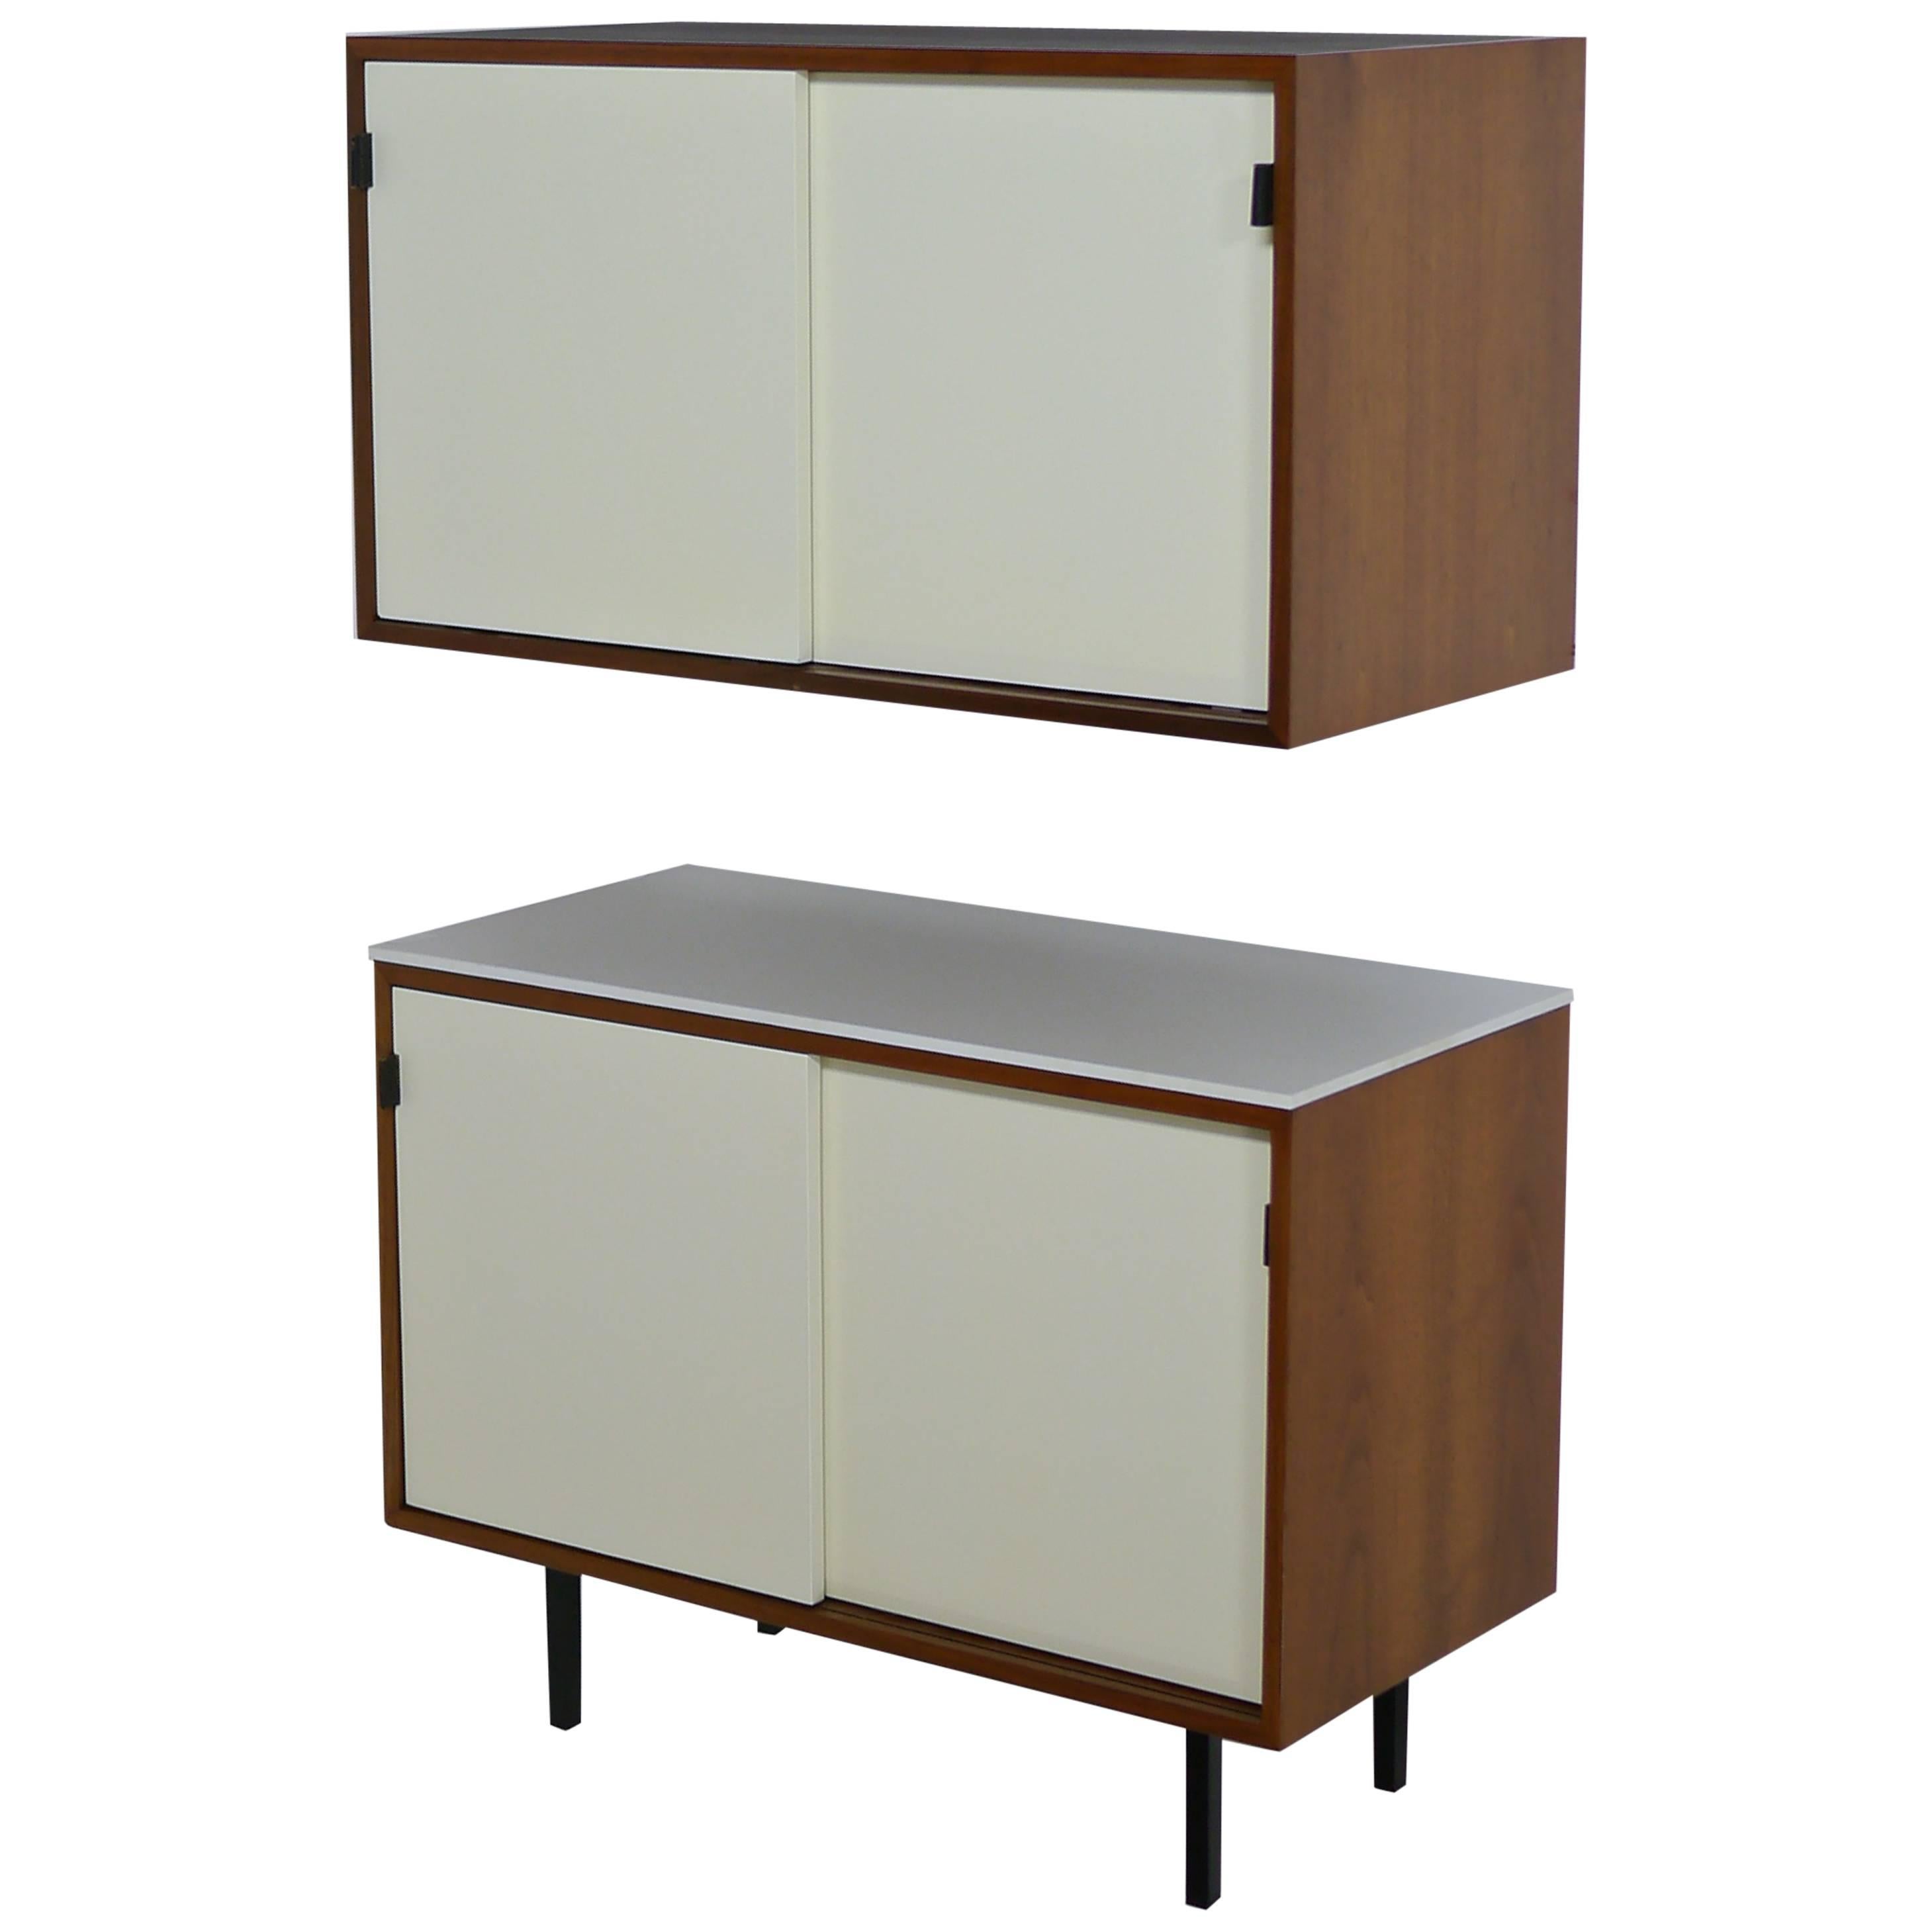 Pair of Knoll Bar Credenzas in White Lacquer, Walnut and Vitrolite